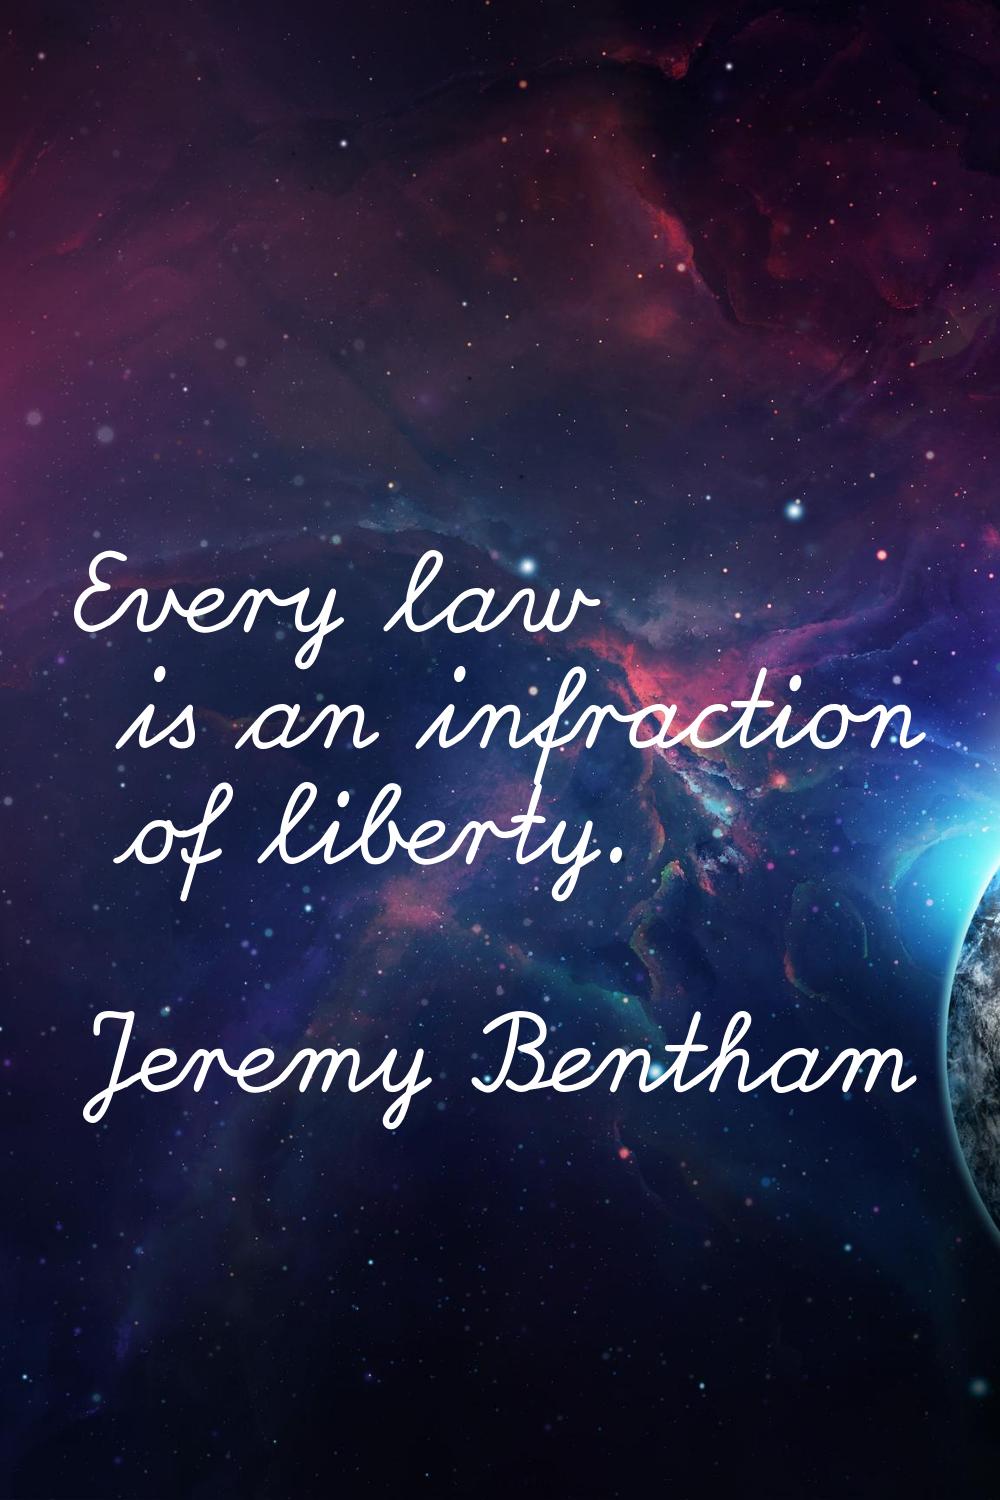 Every law is an infraction of liberty.